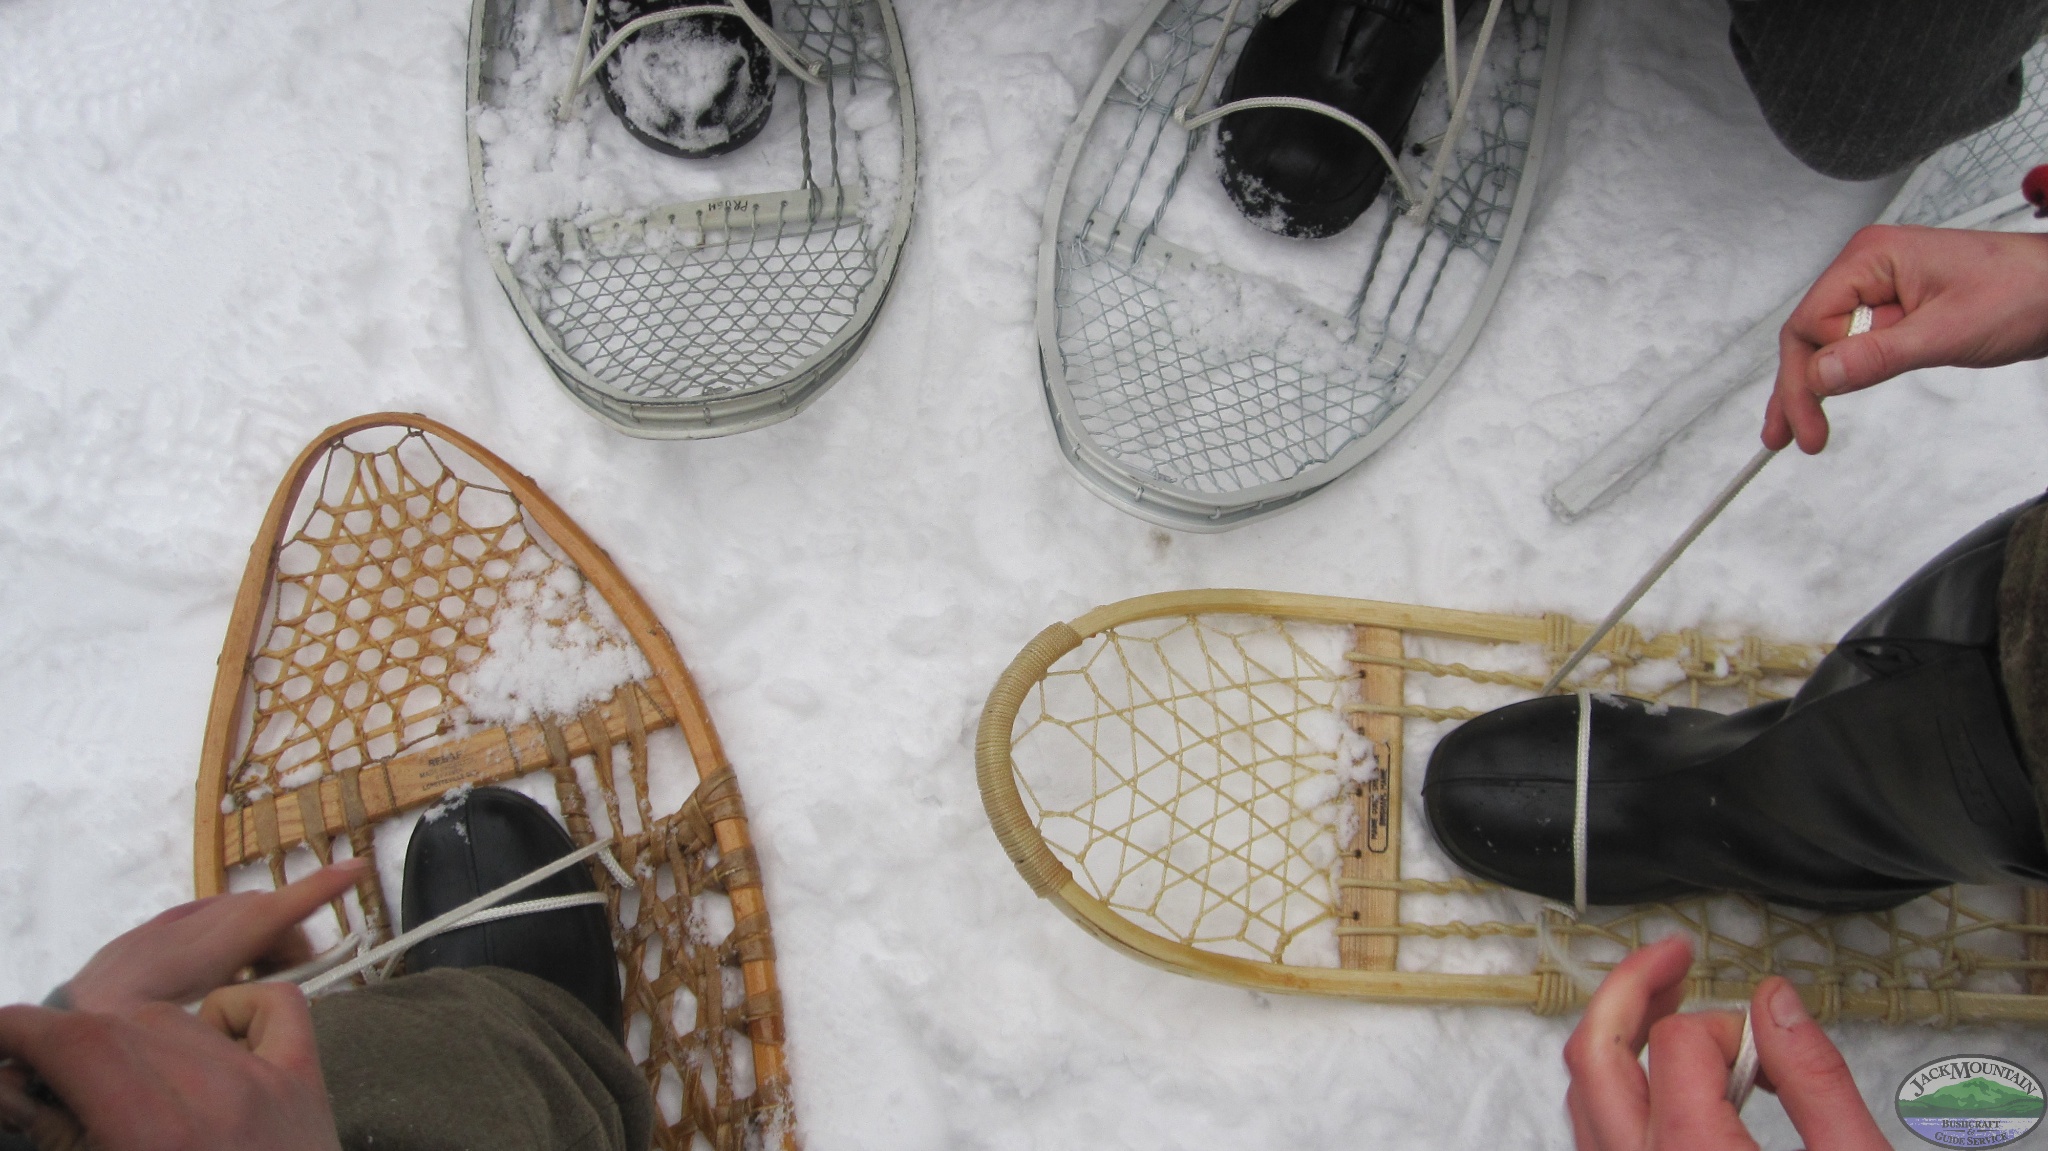 Tying Snowshoes On